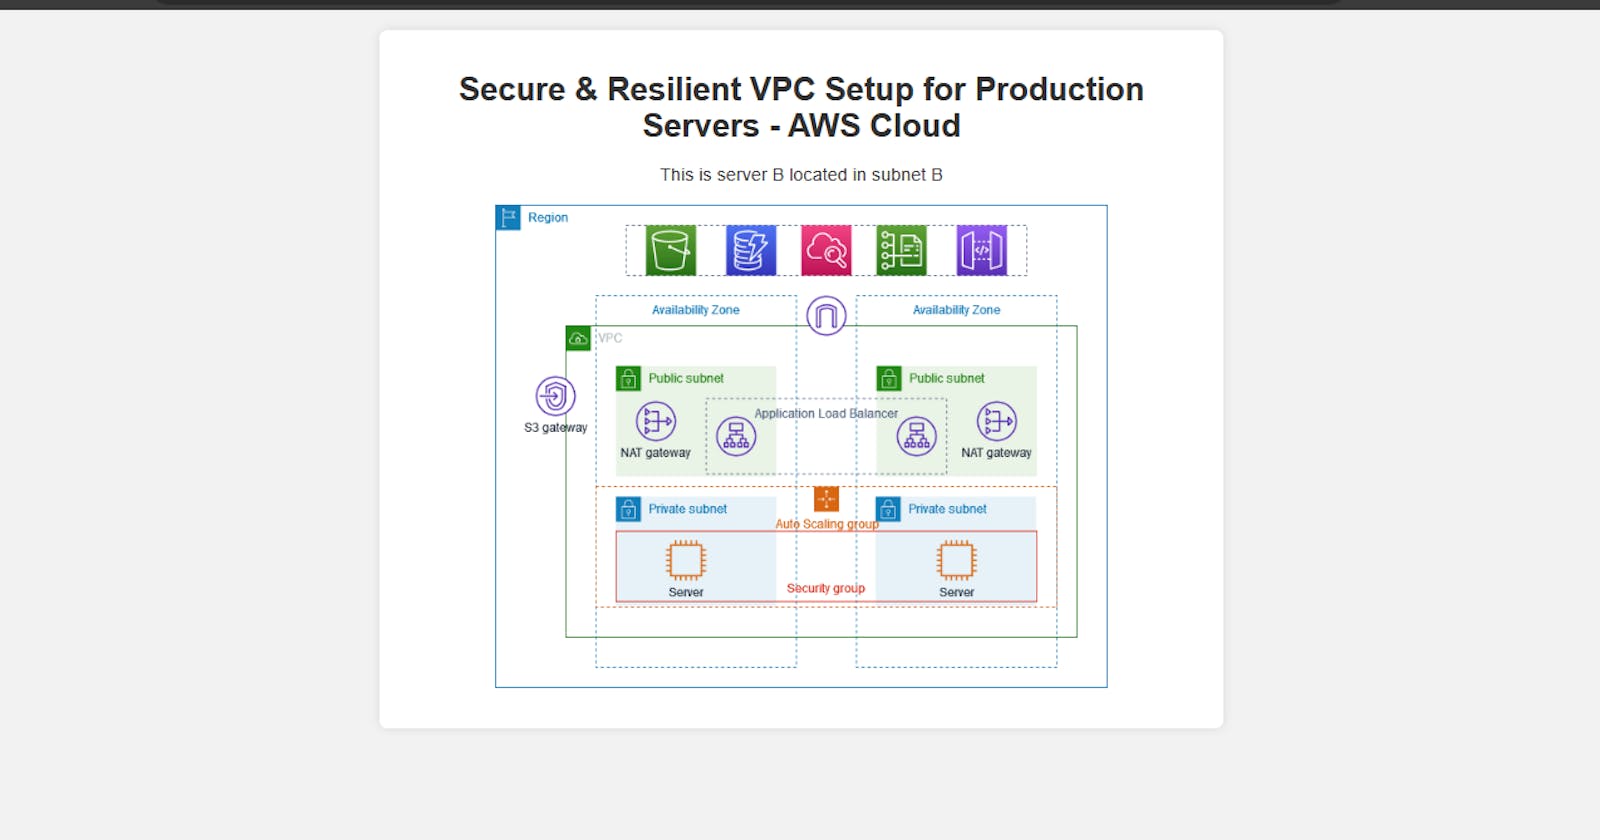 Secure & Resilient VPC Setup for Production Servers - AWS Cloud